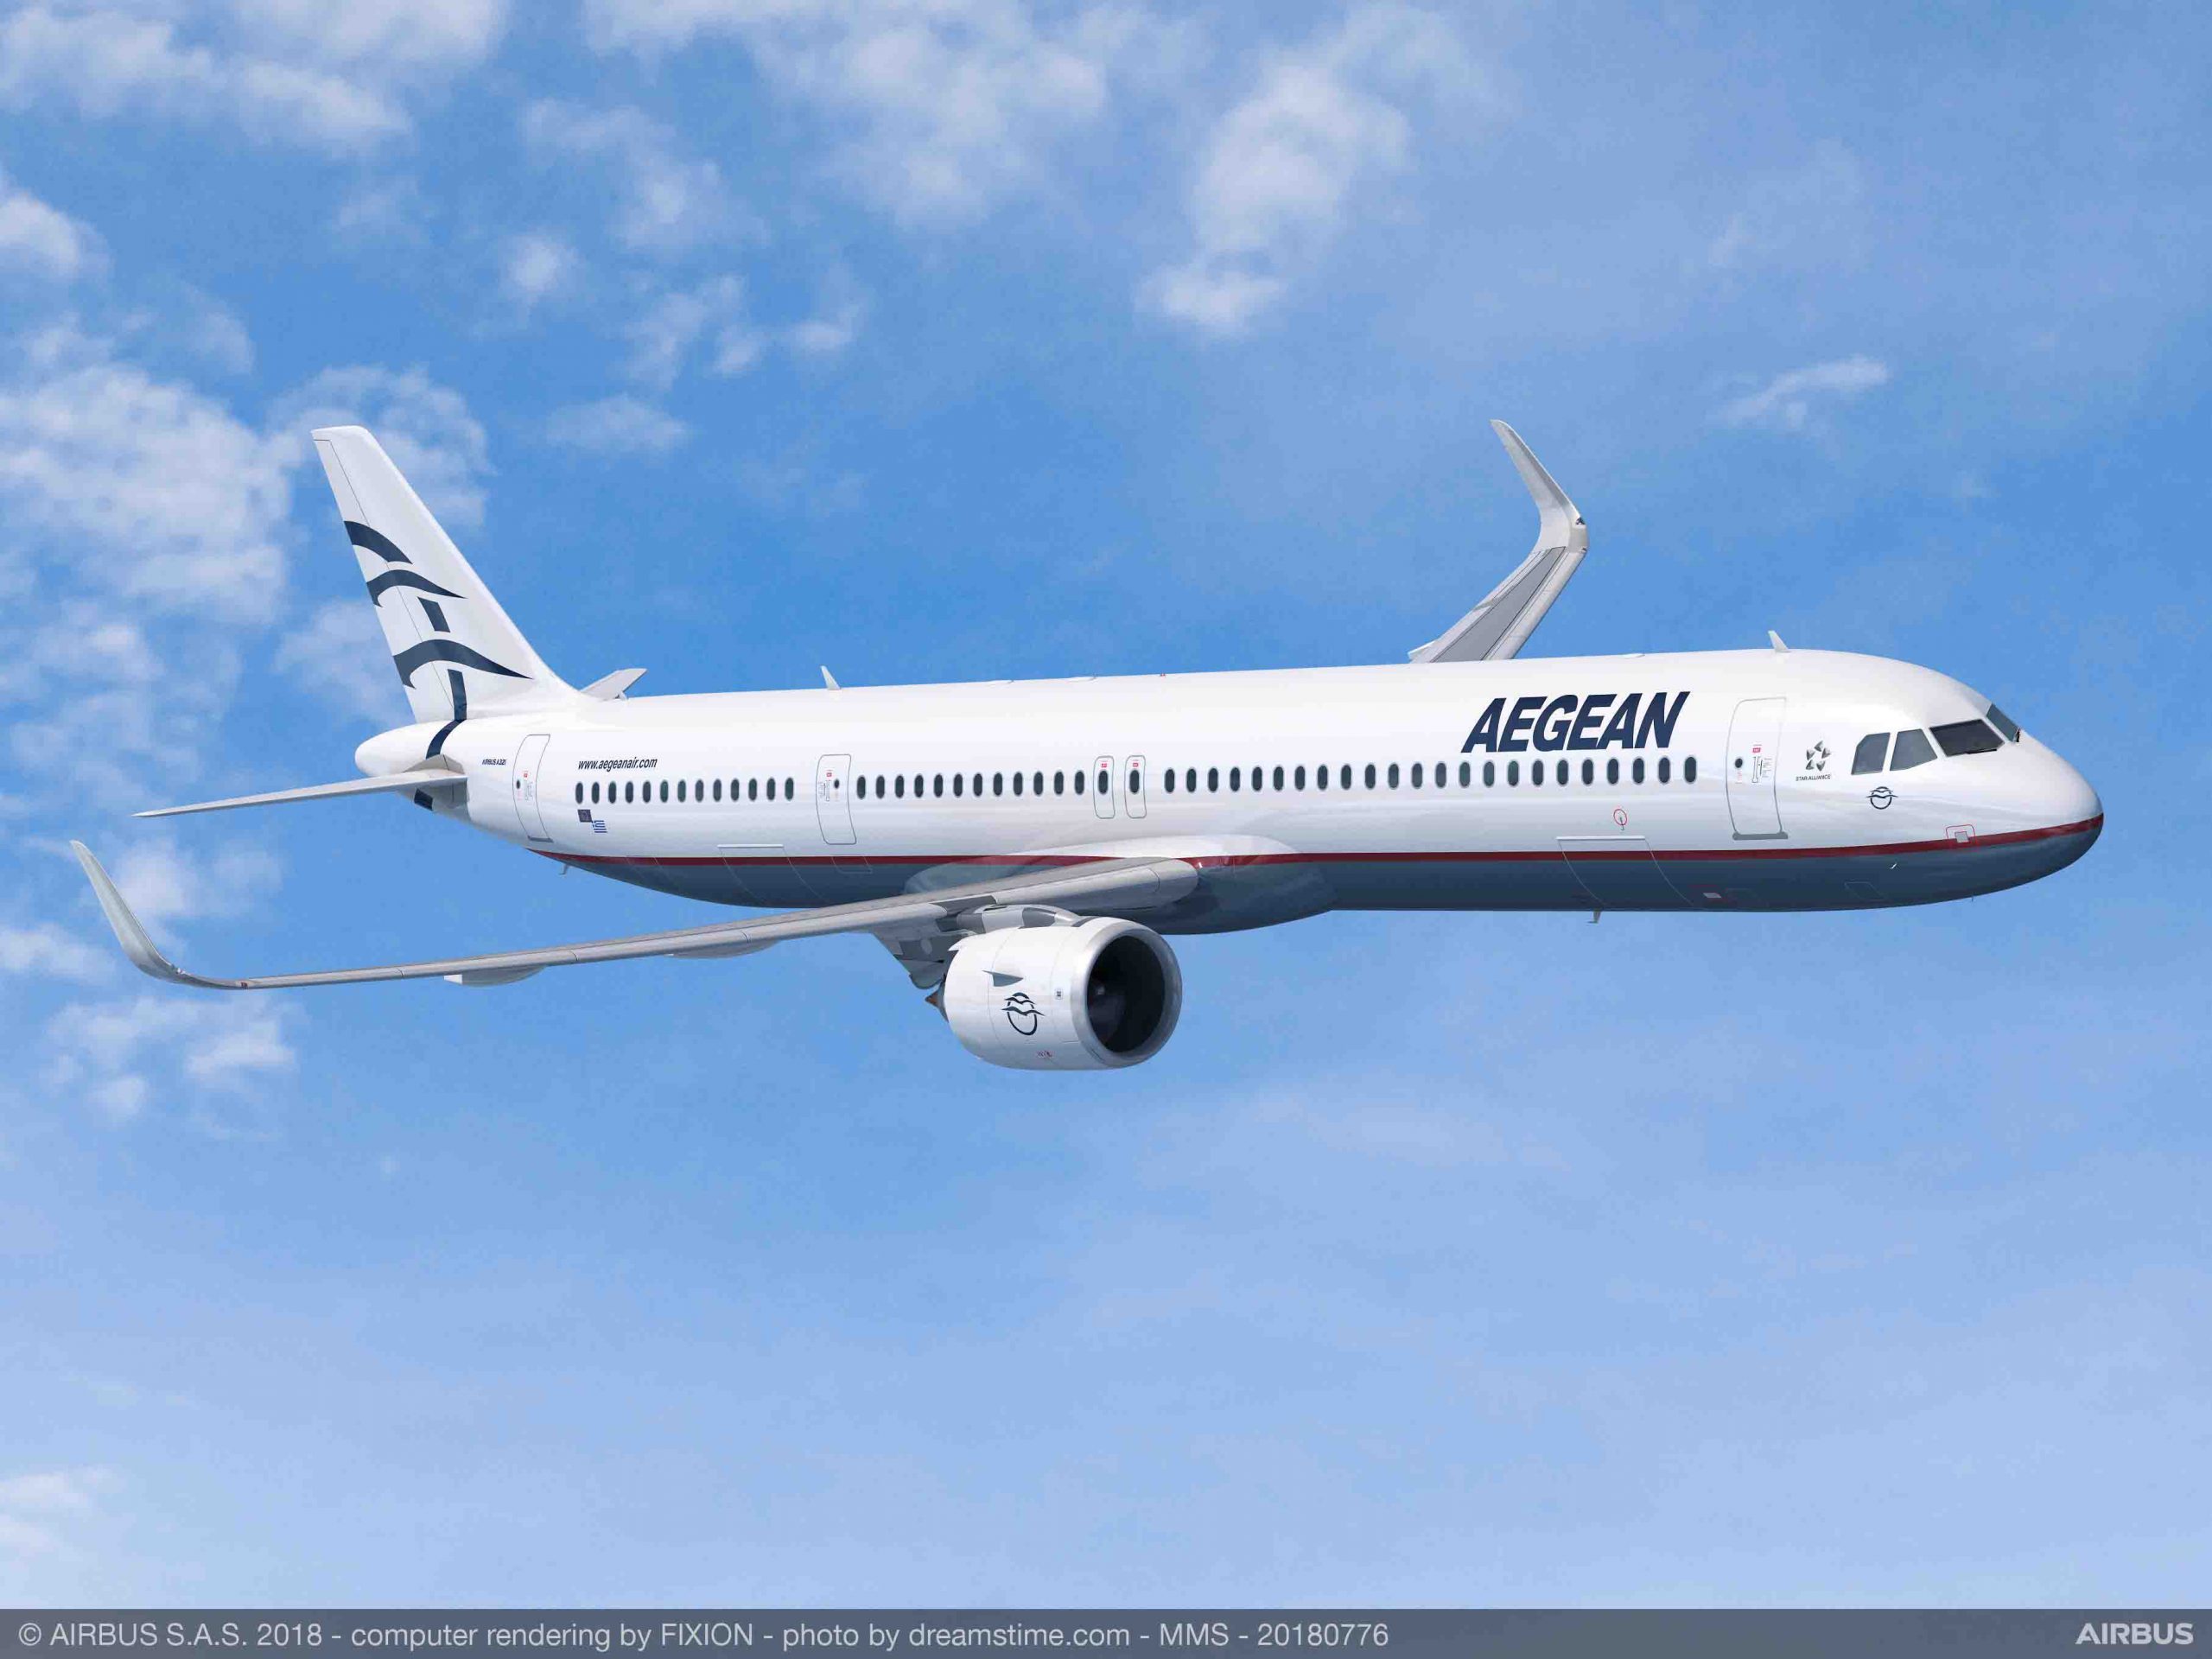 Aegean Airlines posts net loss in its first-quarter 2019 results